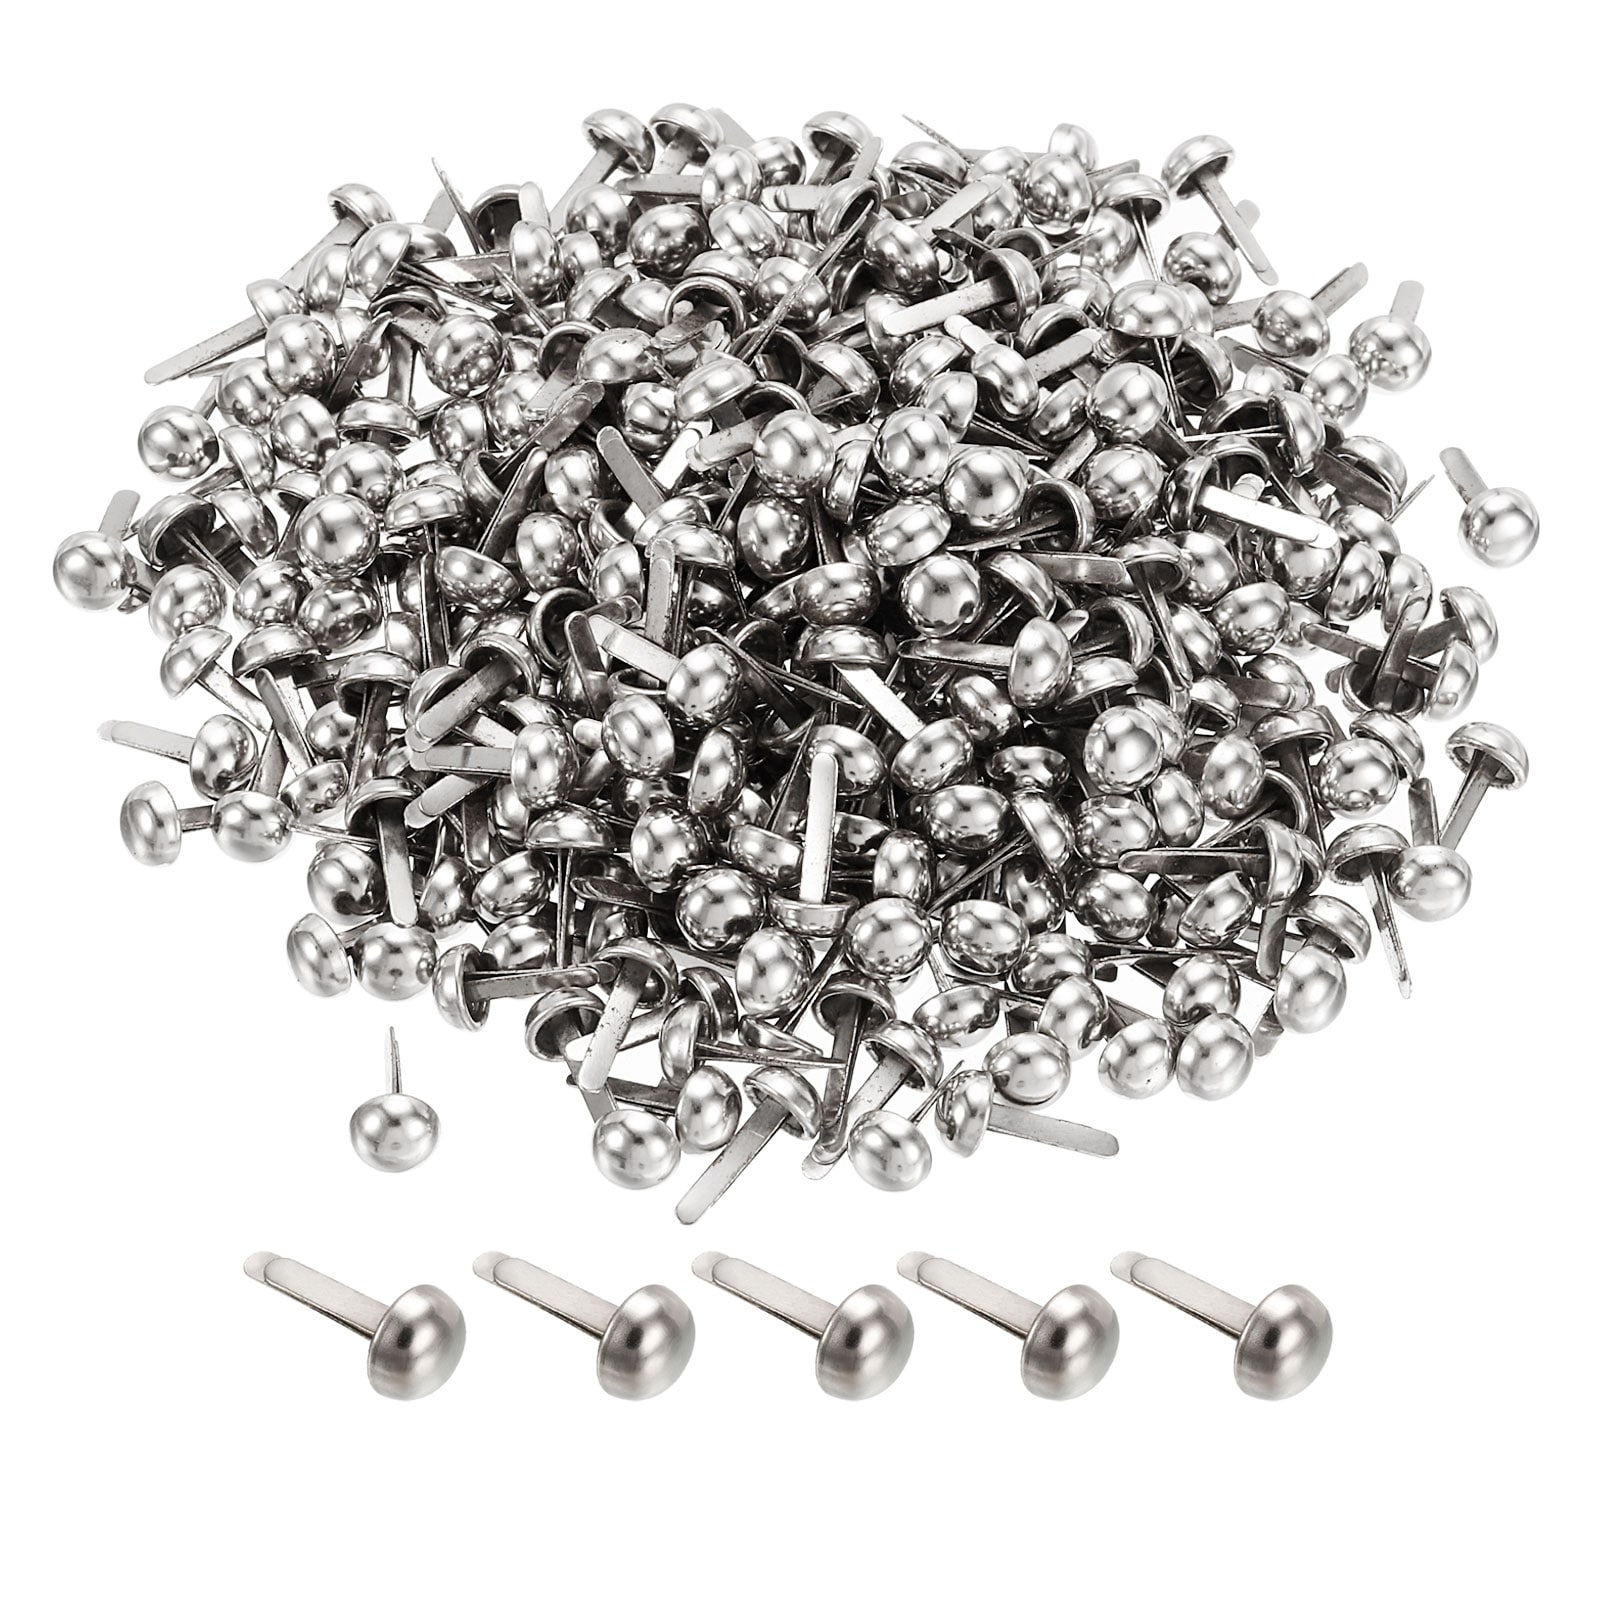 https://ak1.ostkcdn.com/images/products/is/images/direct/28b09183ceb09abd1ef383317c9f988ce0408c1f/500pcs-6x12mm-Mini-Brads-Round-Paper-Fasteners-for-Art-Crafting%2C-Silver-Tone.jpg